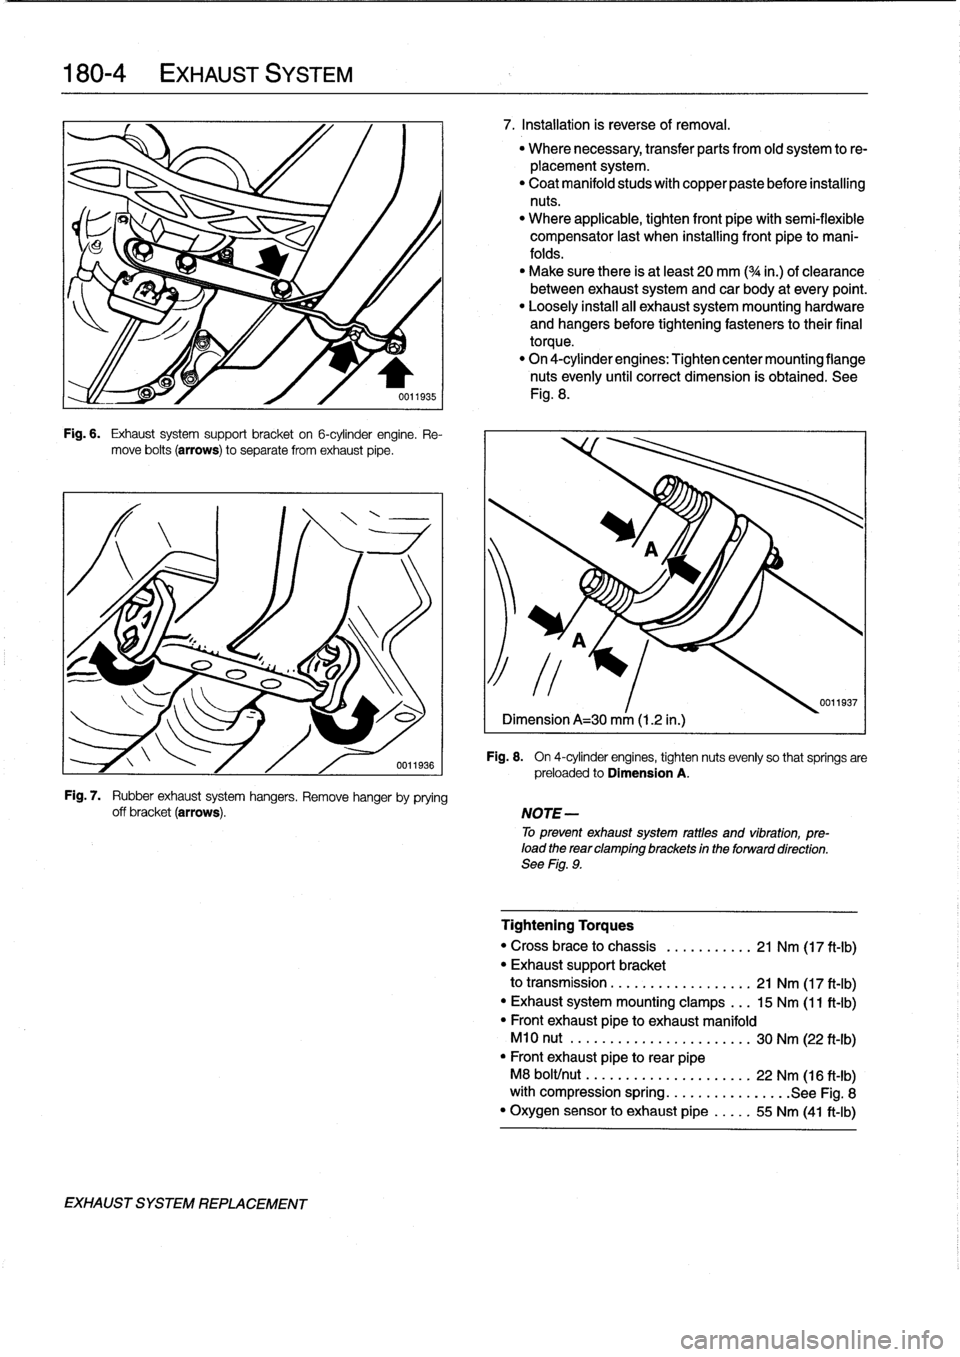 BMW M3 1993 E36 Workshop Manual 
180-
4

	

EXHAUST
SYSTEM

Fig
.
6
.

	

Exhaust
system
support
bracket
on
6-cylinder
engine
.
Re-
move
bolts
(arrows)
to
separate
from
exhaust
pipe
.

Fig
.
7
.

	

Rubber
exhaust
system
hangers
.
R